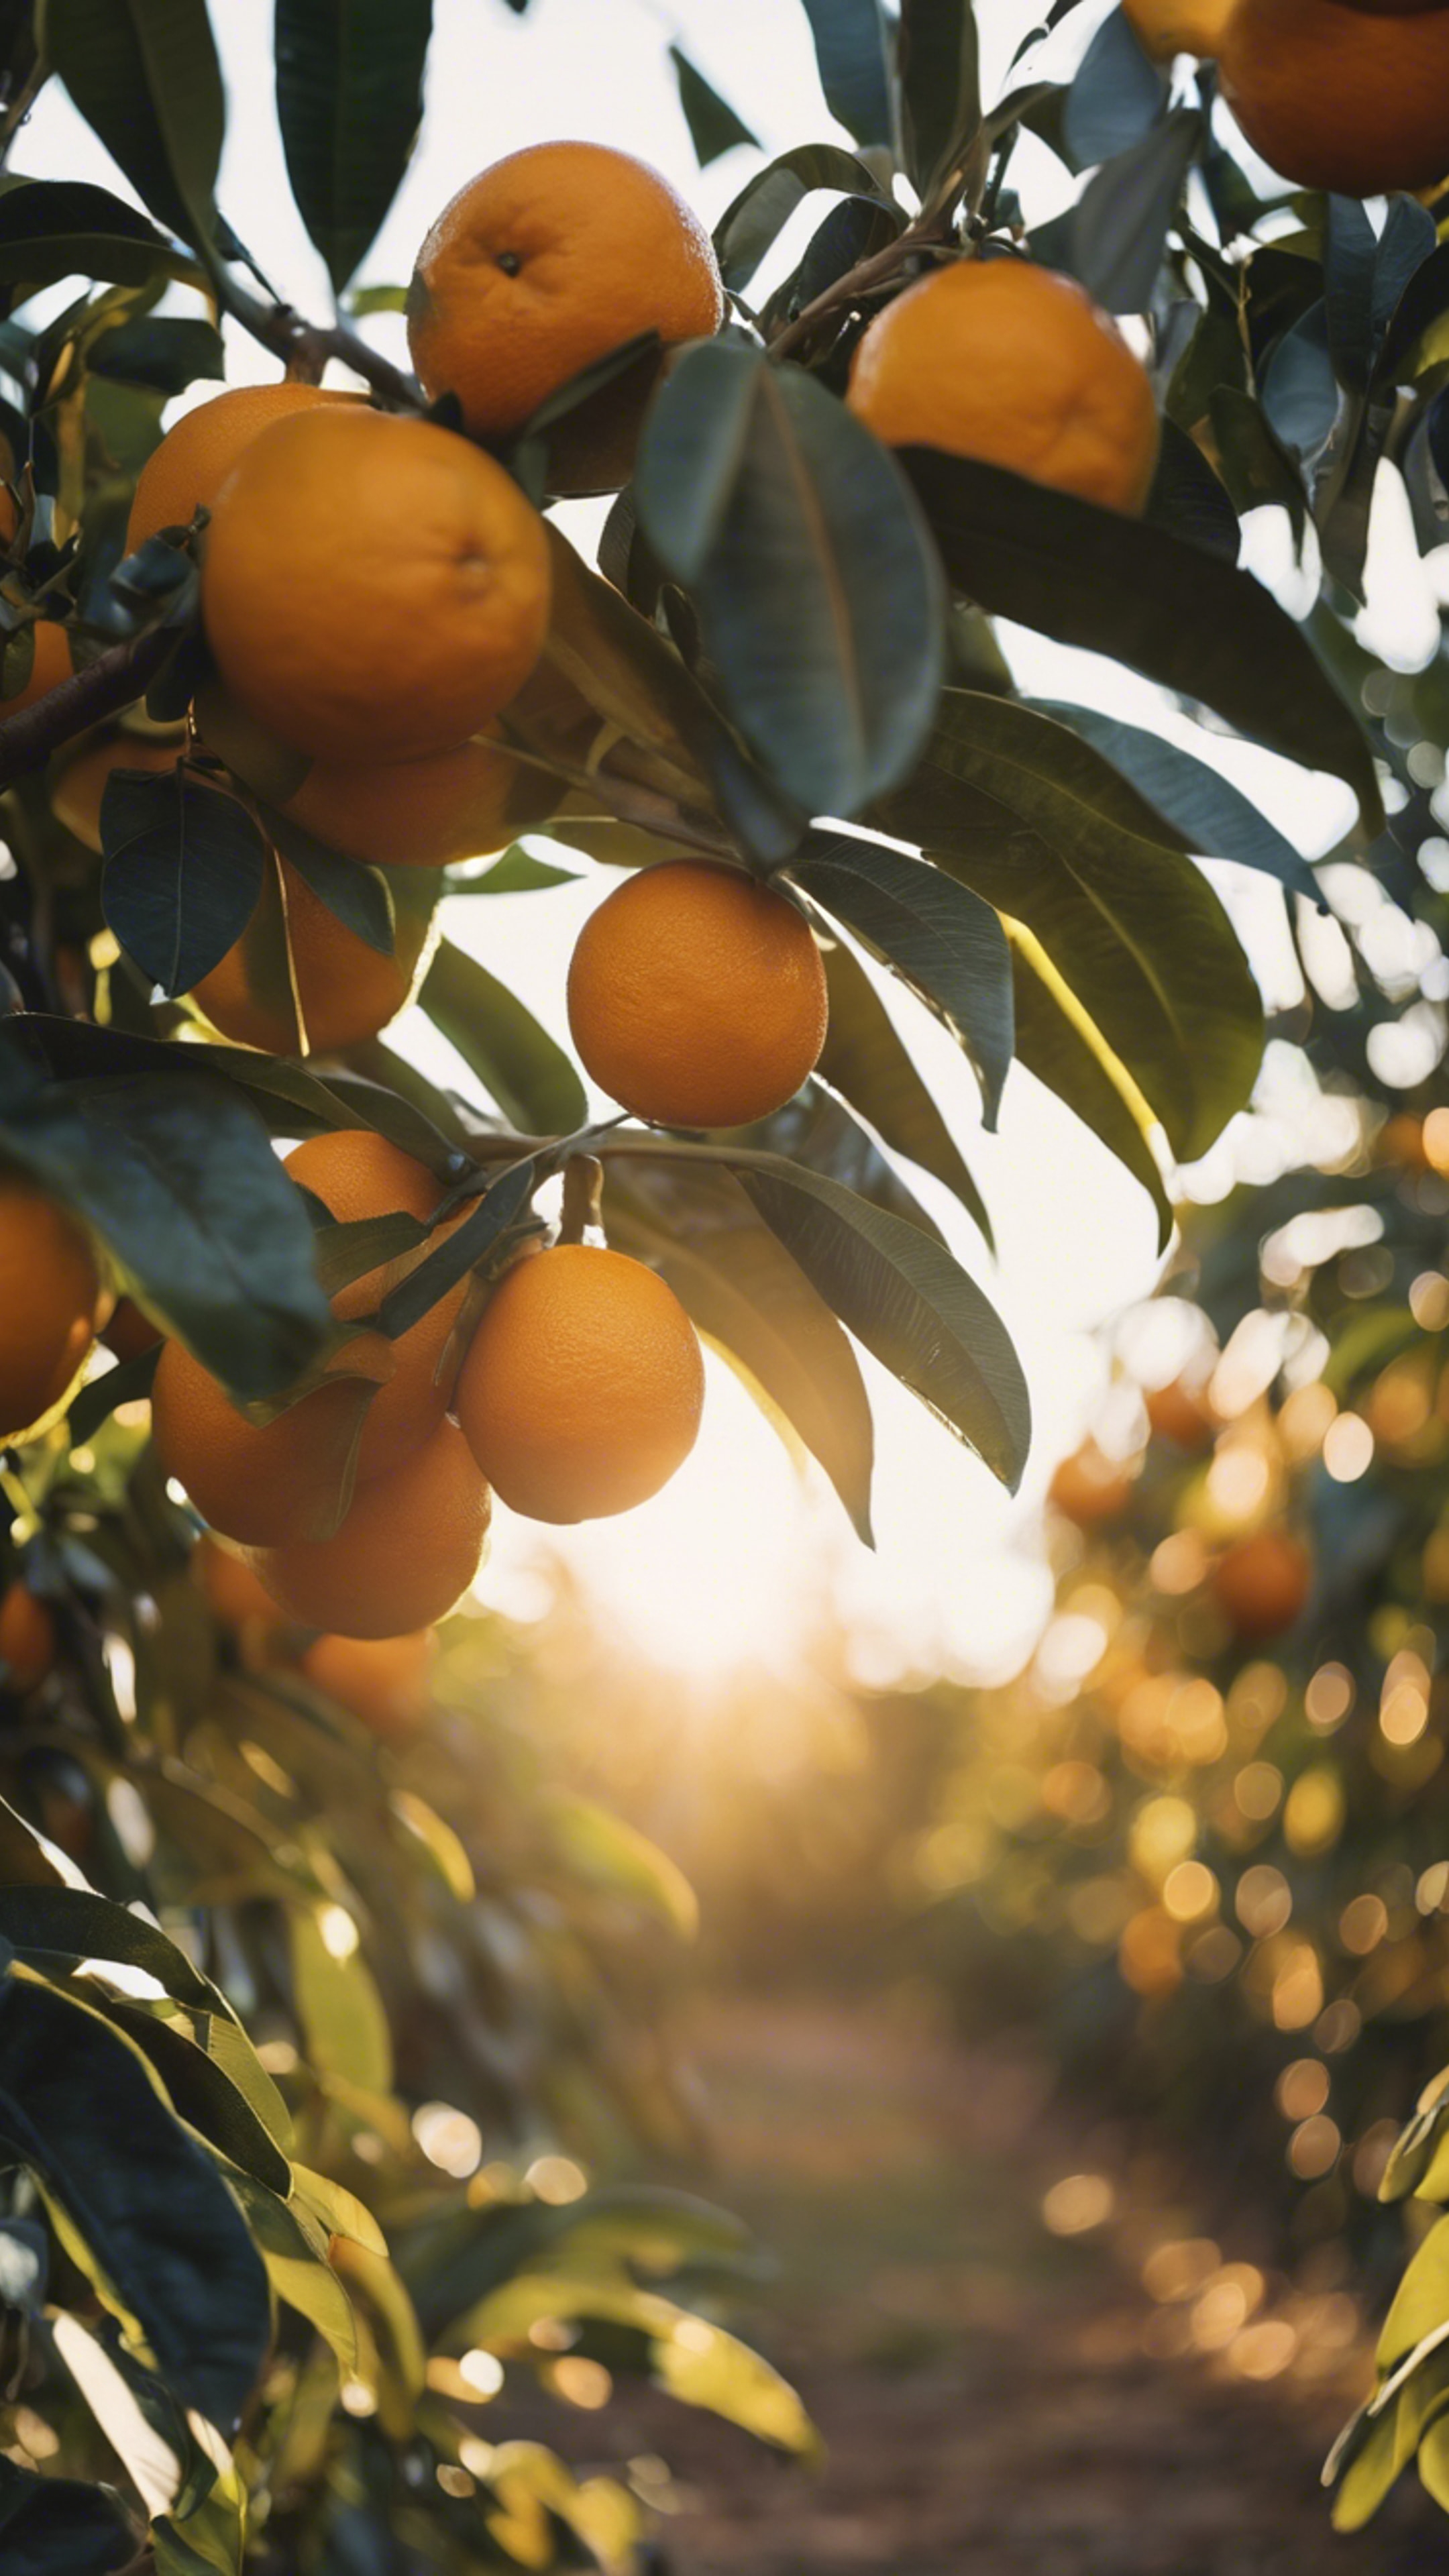 An orange grove in central Florida, with the sun casting a golden hue over ripe oranges ready for harvest. Tapetai[4bbebc31cb8441e2b681]